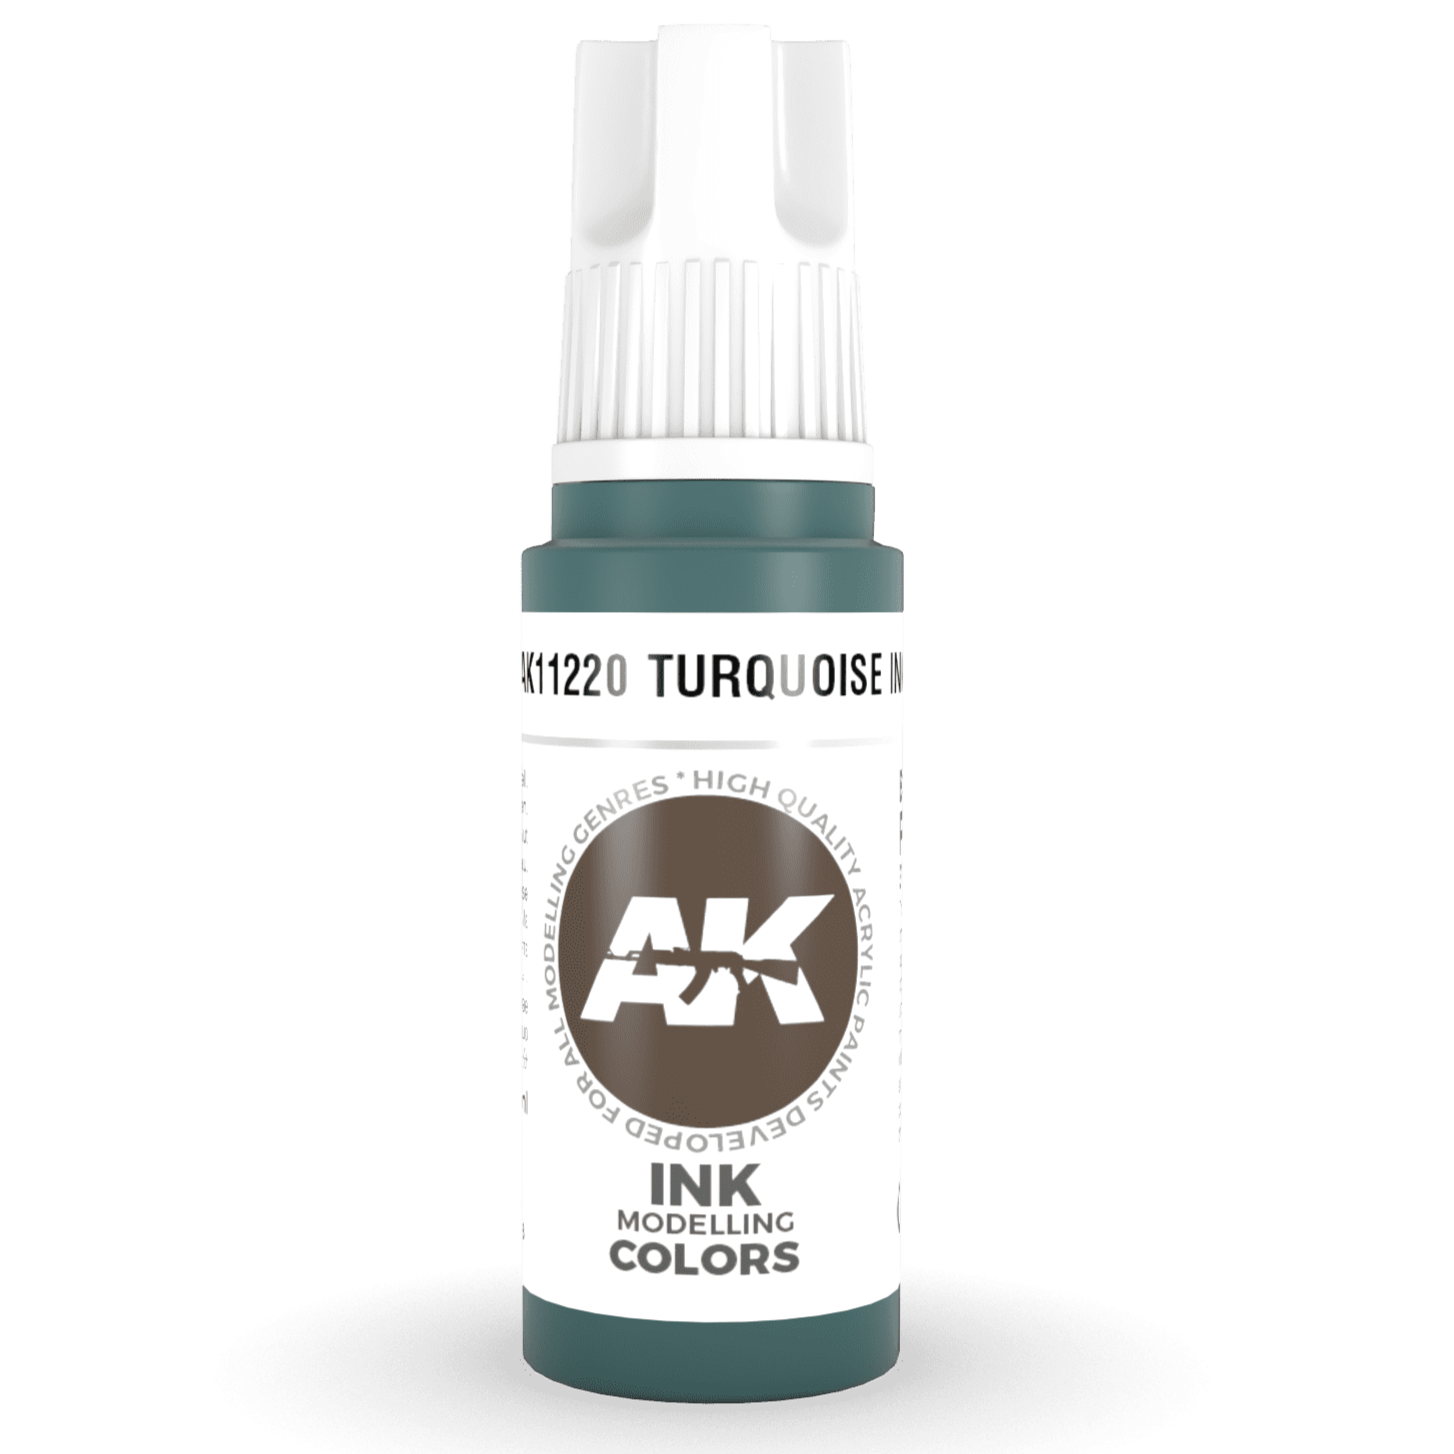 3rd Gen Acrylic - Turquoise INK 17ml - Loaded Dice